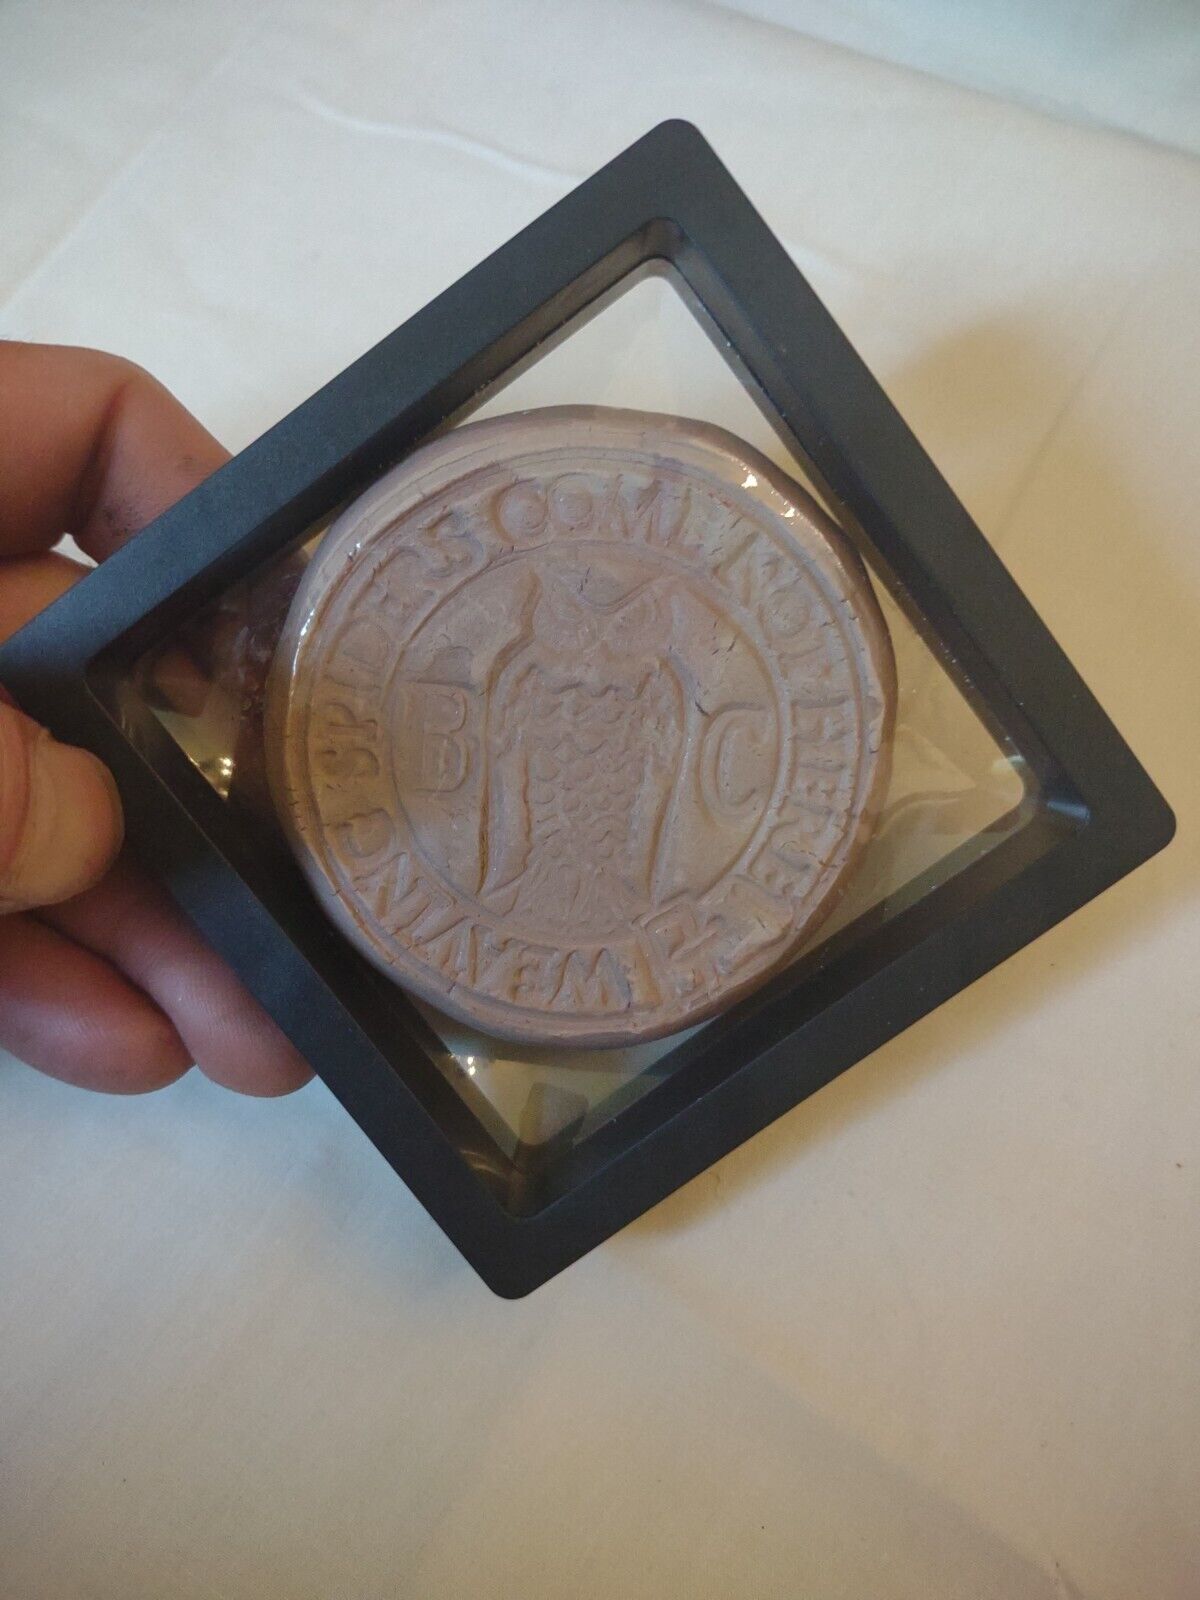 Bohemian Club Motto Clay Medallion Hand Sculpted by Russian River Artist